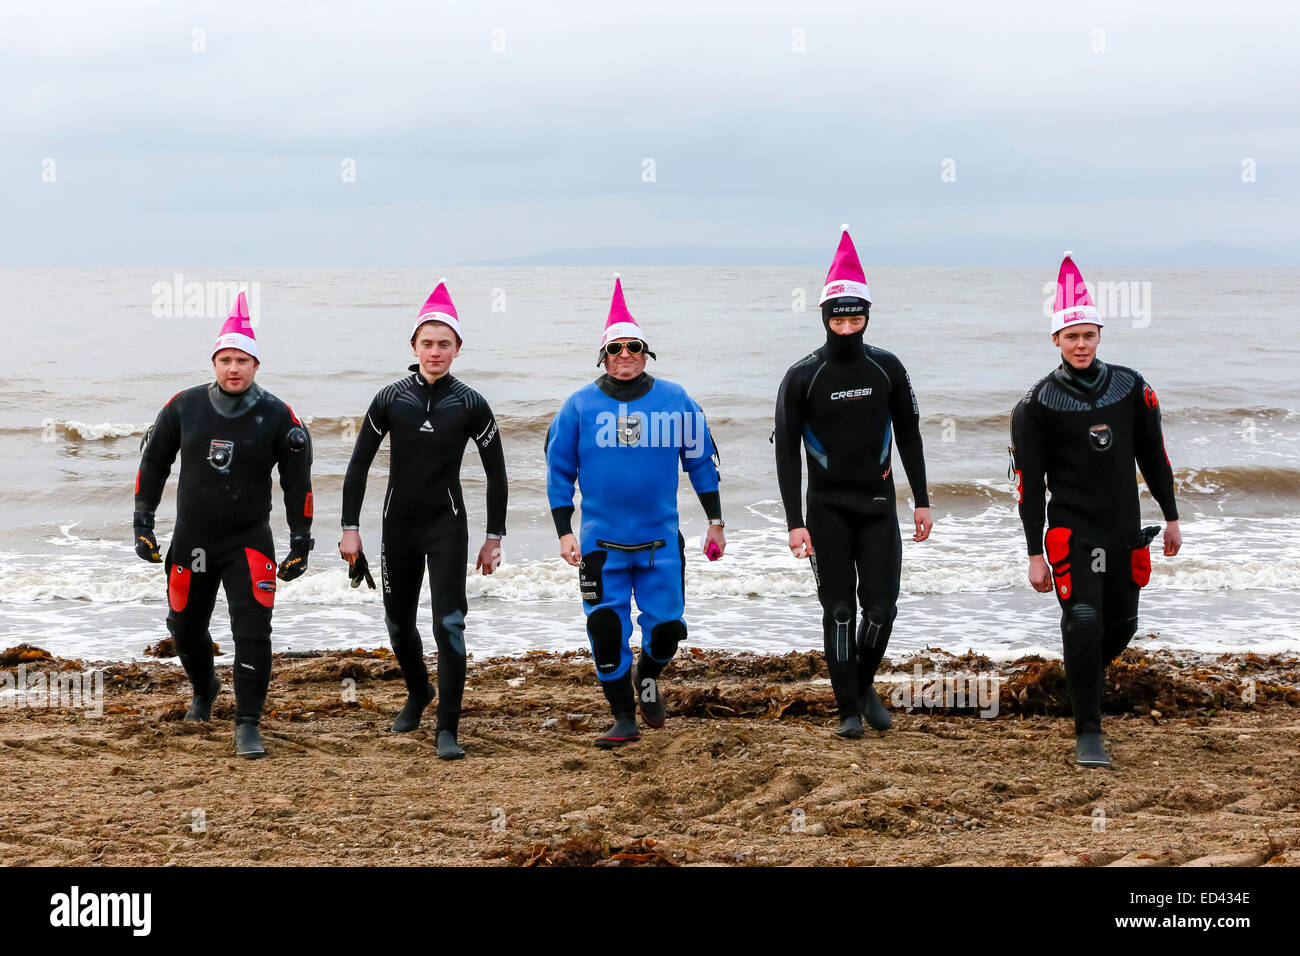 Prestwick, Scotland, UK. 26th Dec, 2014. The 9th annual clic sergent Boxing Day swim was held at Prestwick beach, Ayrshire, near to the hospice. This attracted over 200  swimmers many in fancy dress costumes were marched to the beach by local piper Billy Kenny. This year was particularly costly for Clicsergent when during the recent storms the hospice was struck twice by lightning causing over £200,000 worth of damage and disruption to care. The swimmers hope to raise over £25,000 by sponsorship. Credit:  Findlay/Alamy Live News Stock Photo